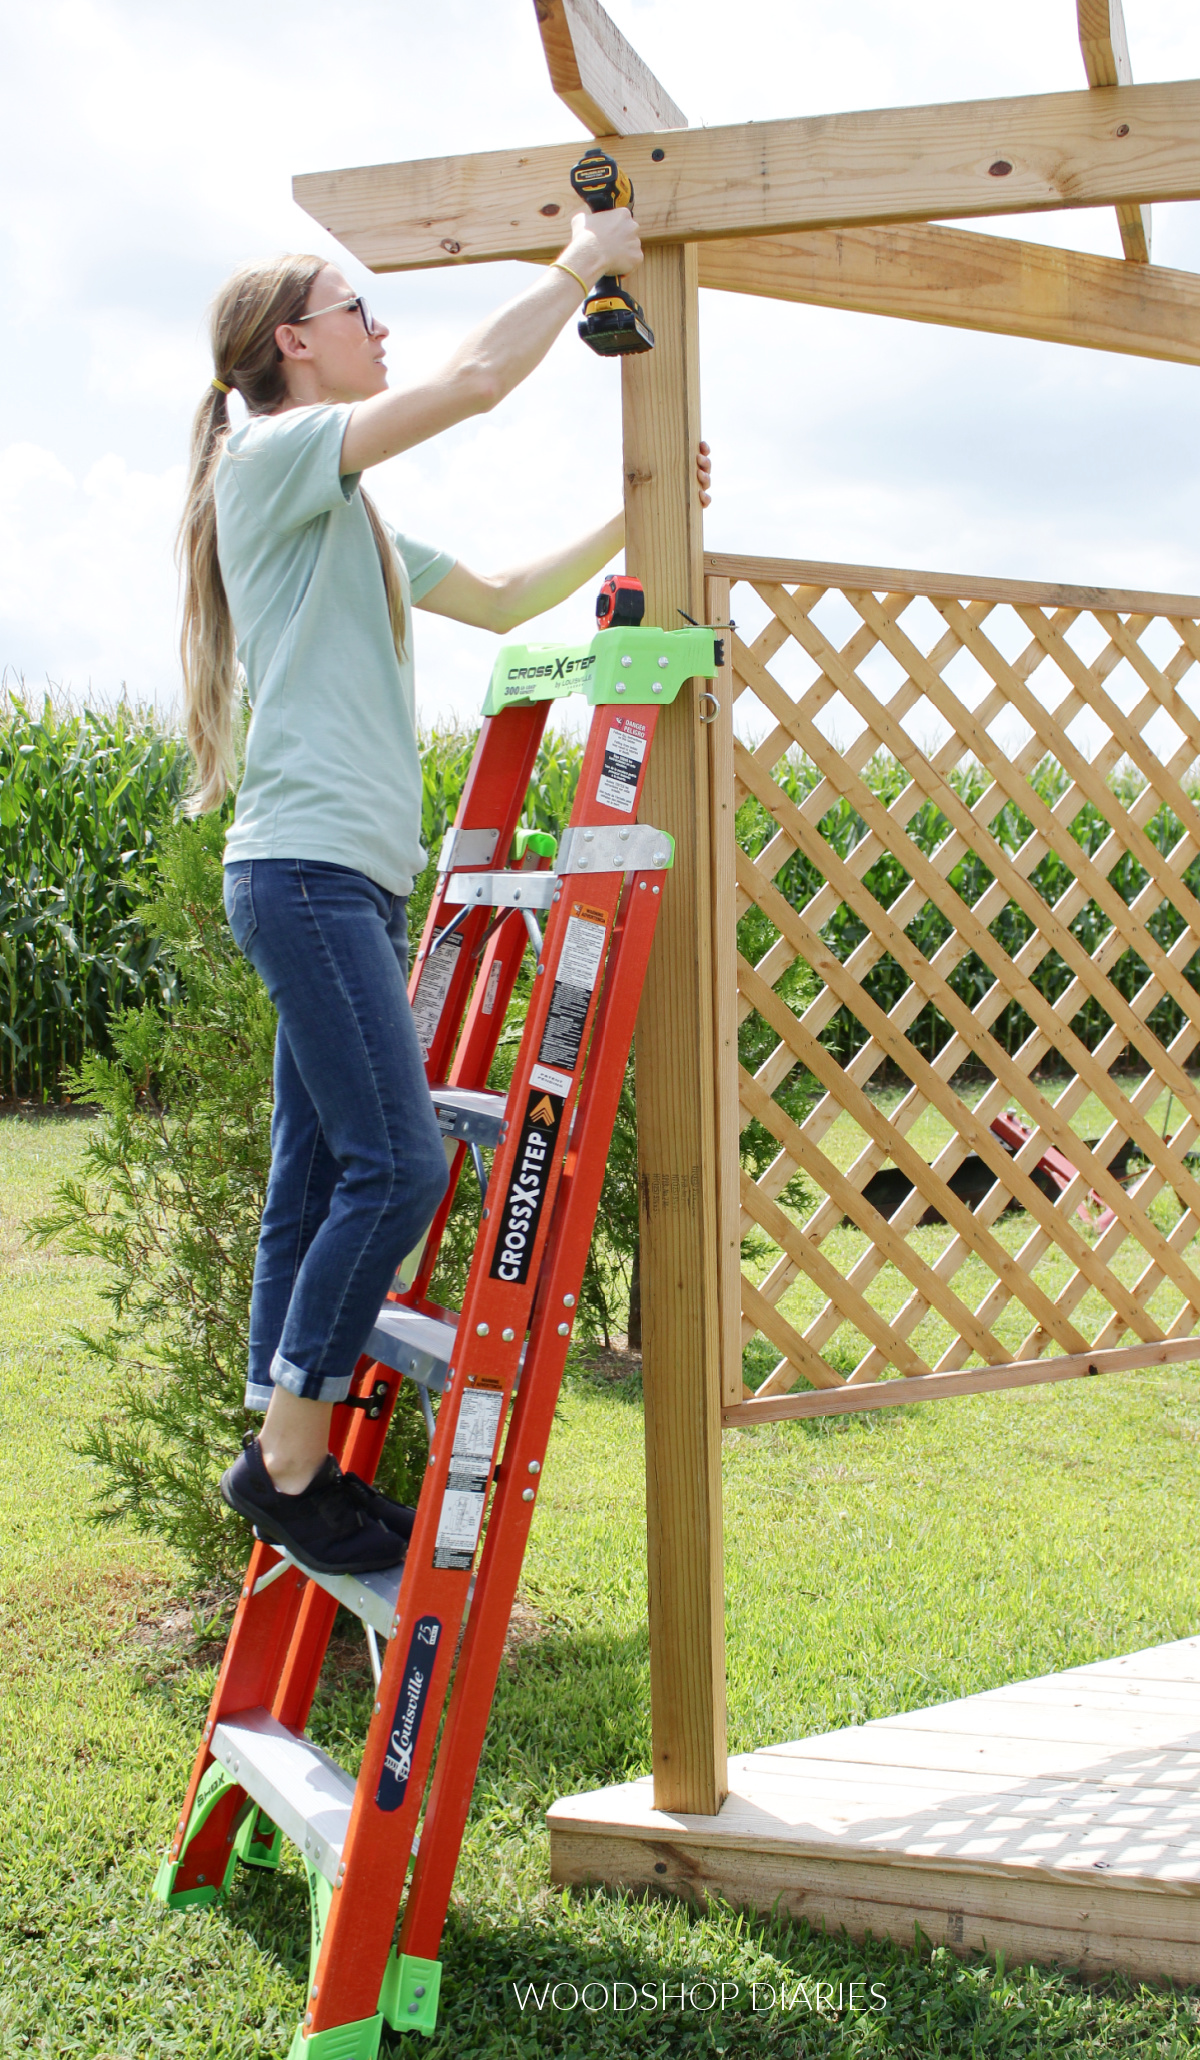 Shara using cross step ladder on corner post of hammock stand to drive screw up high